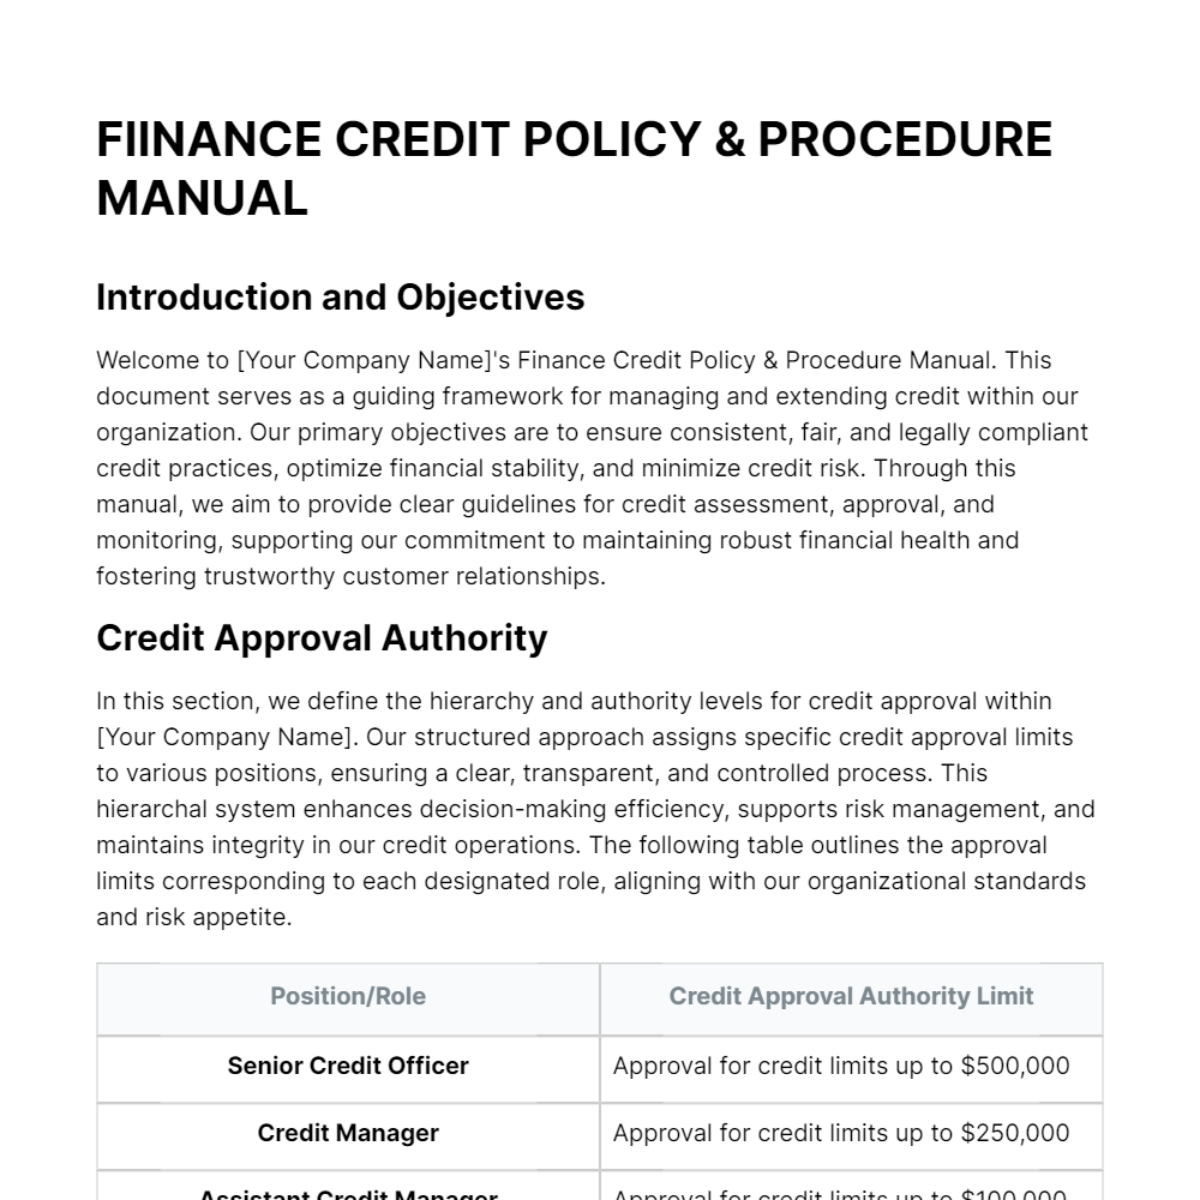 Free Finance Credit Policy & Procedure Manual Template